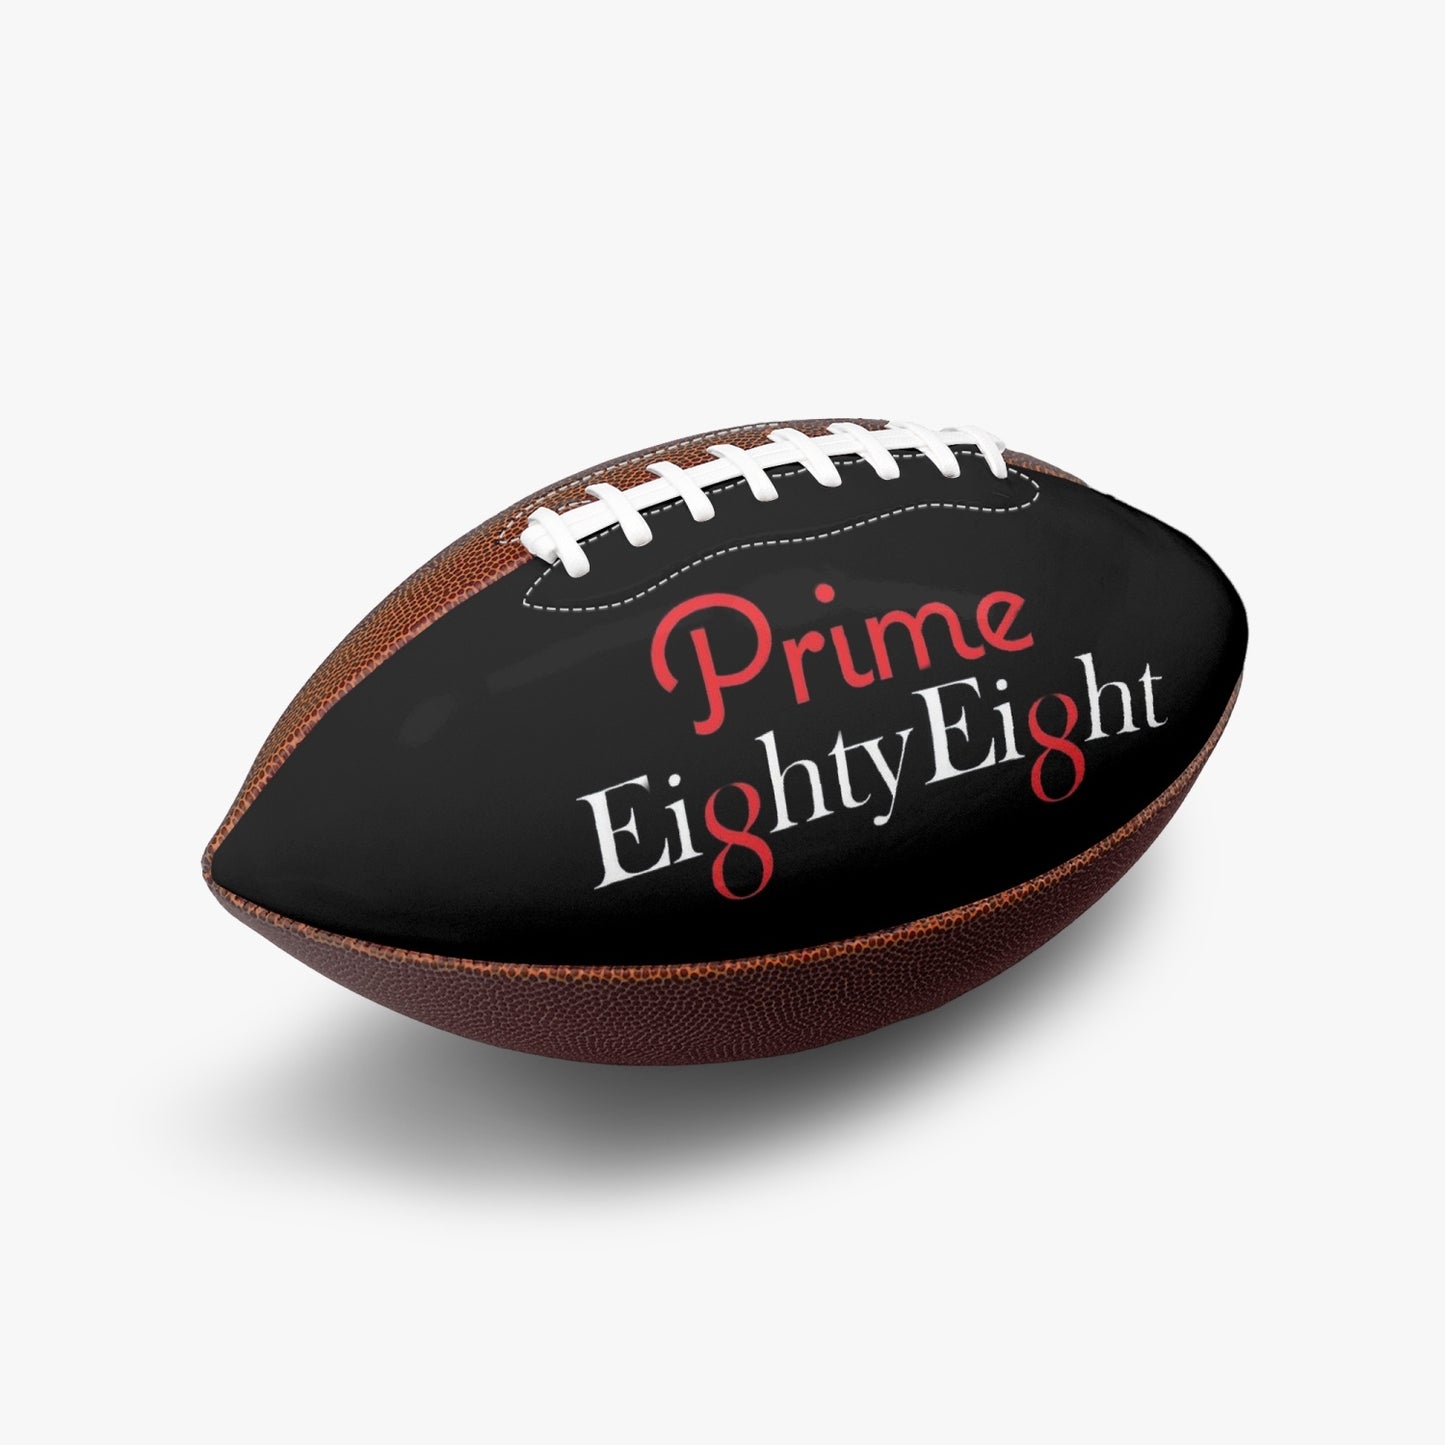 NFL sized football - Prime 88 Edition